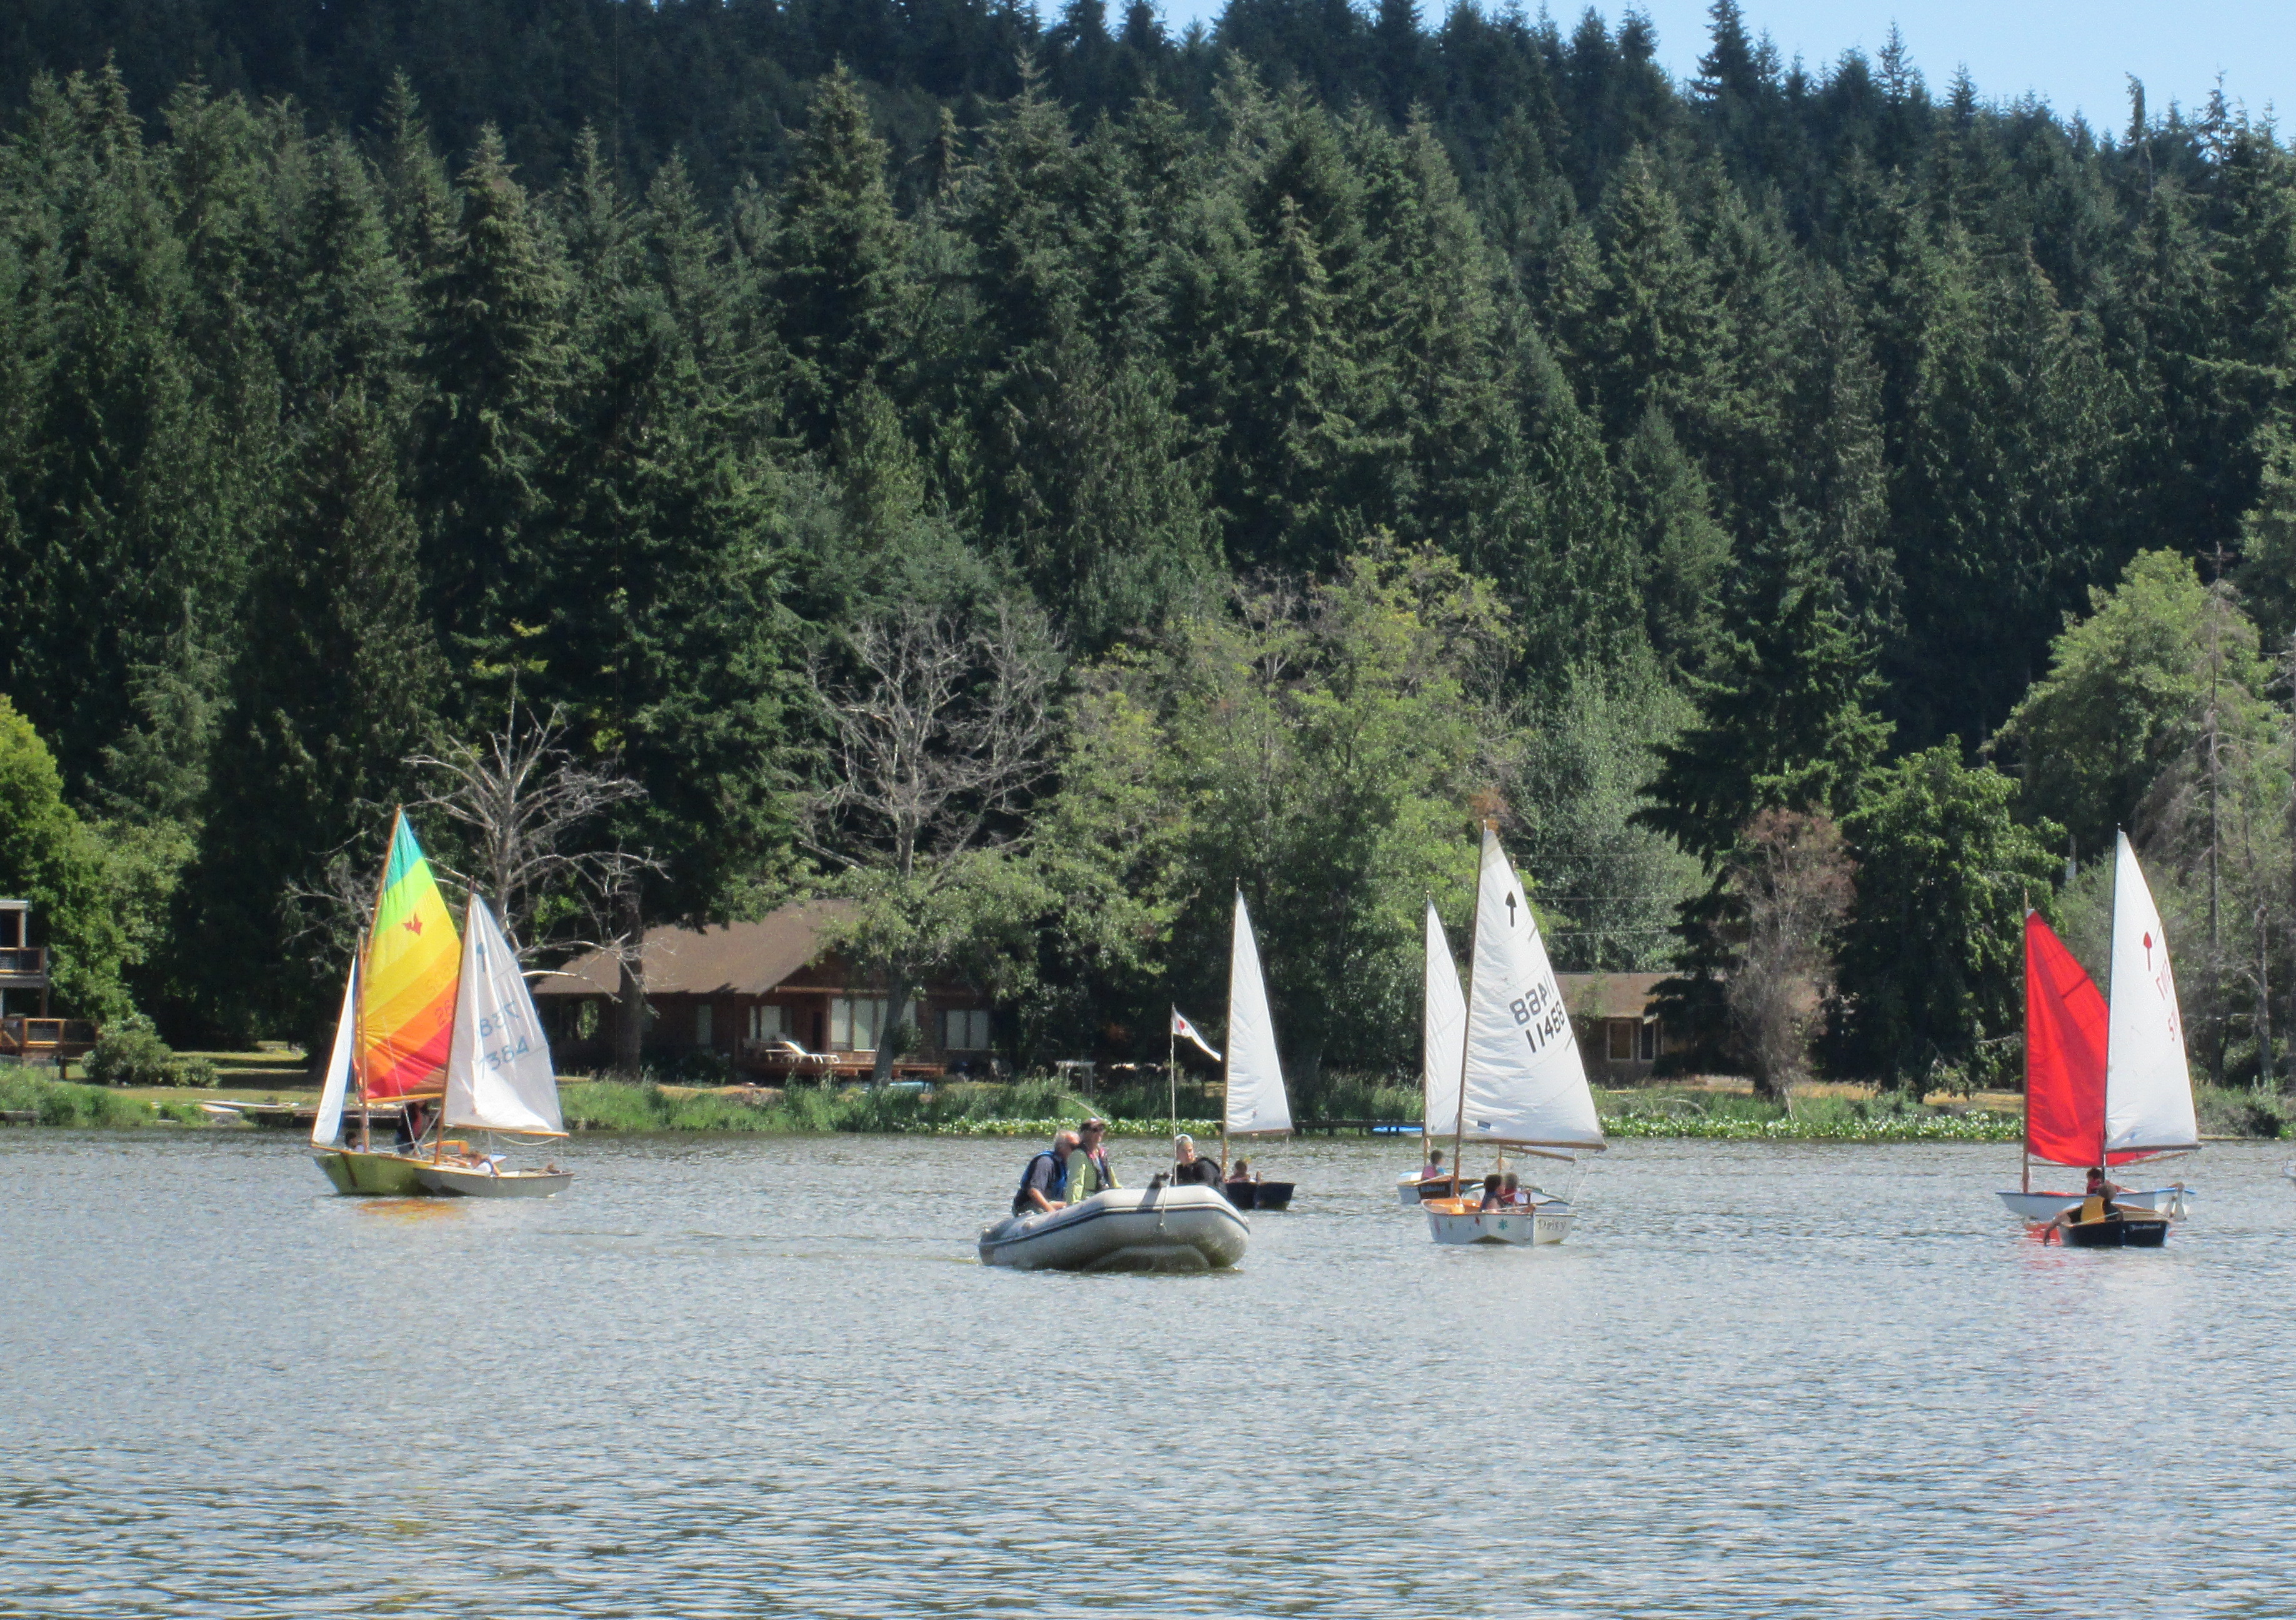 South Whidbey Yacht Club